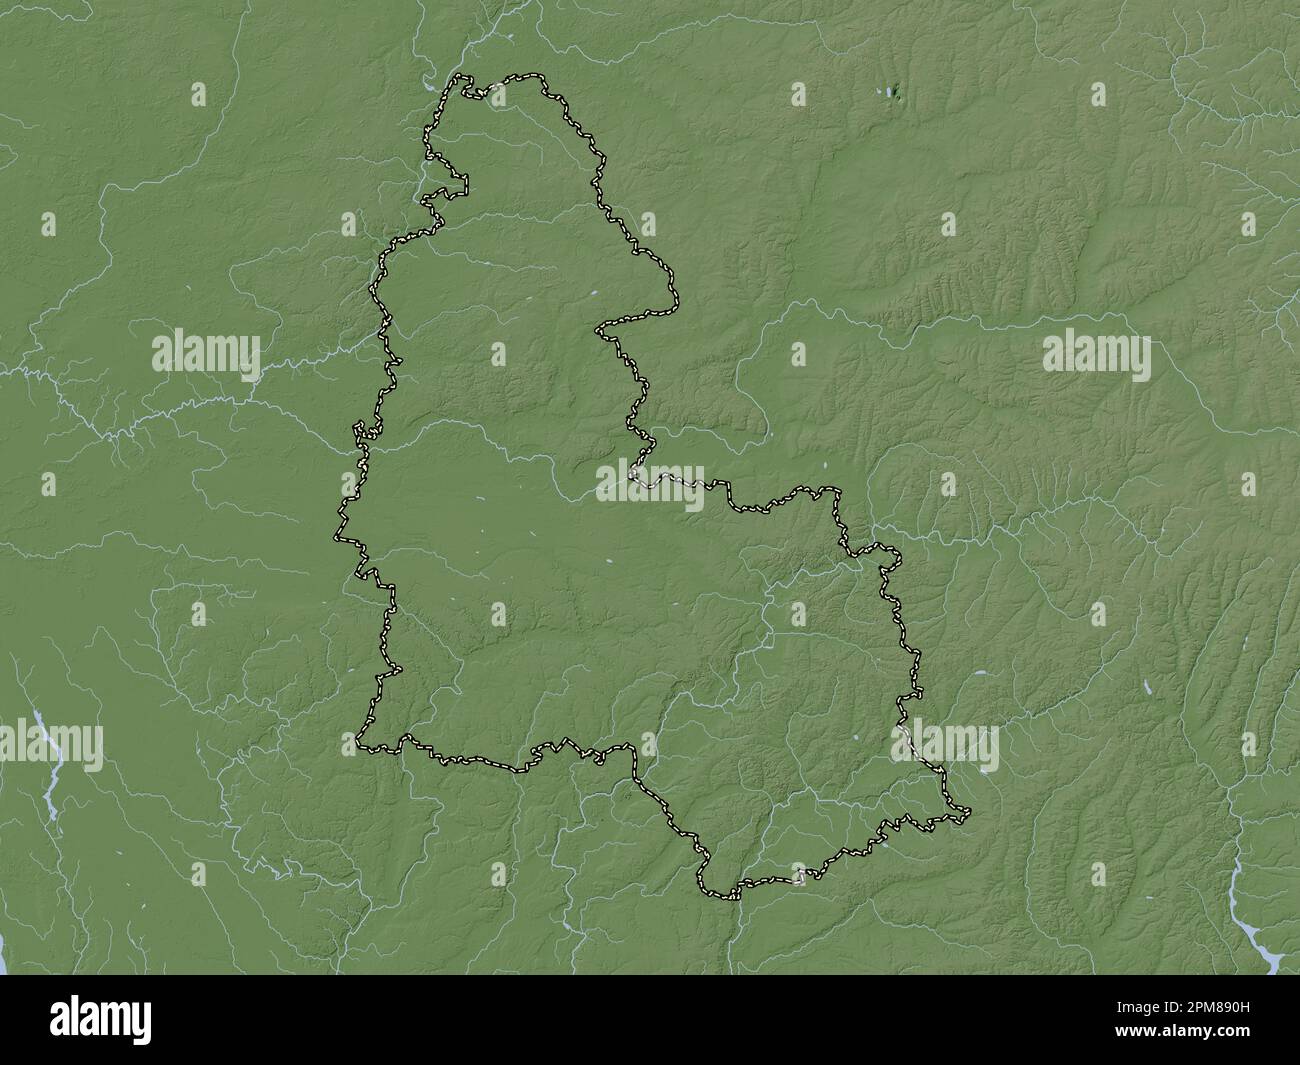 Sumy, region of Ukraine. Elevation map colored in wiki style with lakes ...